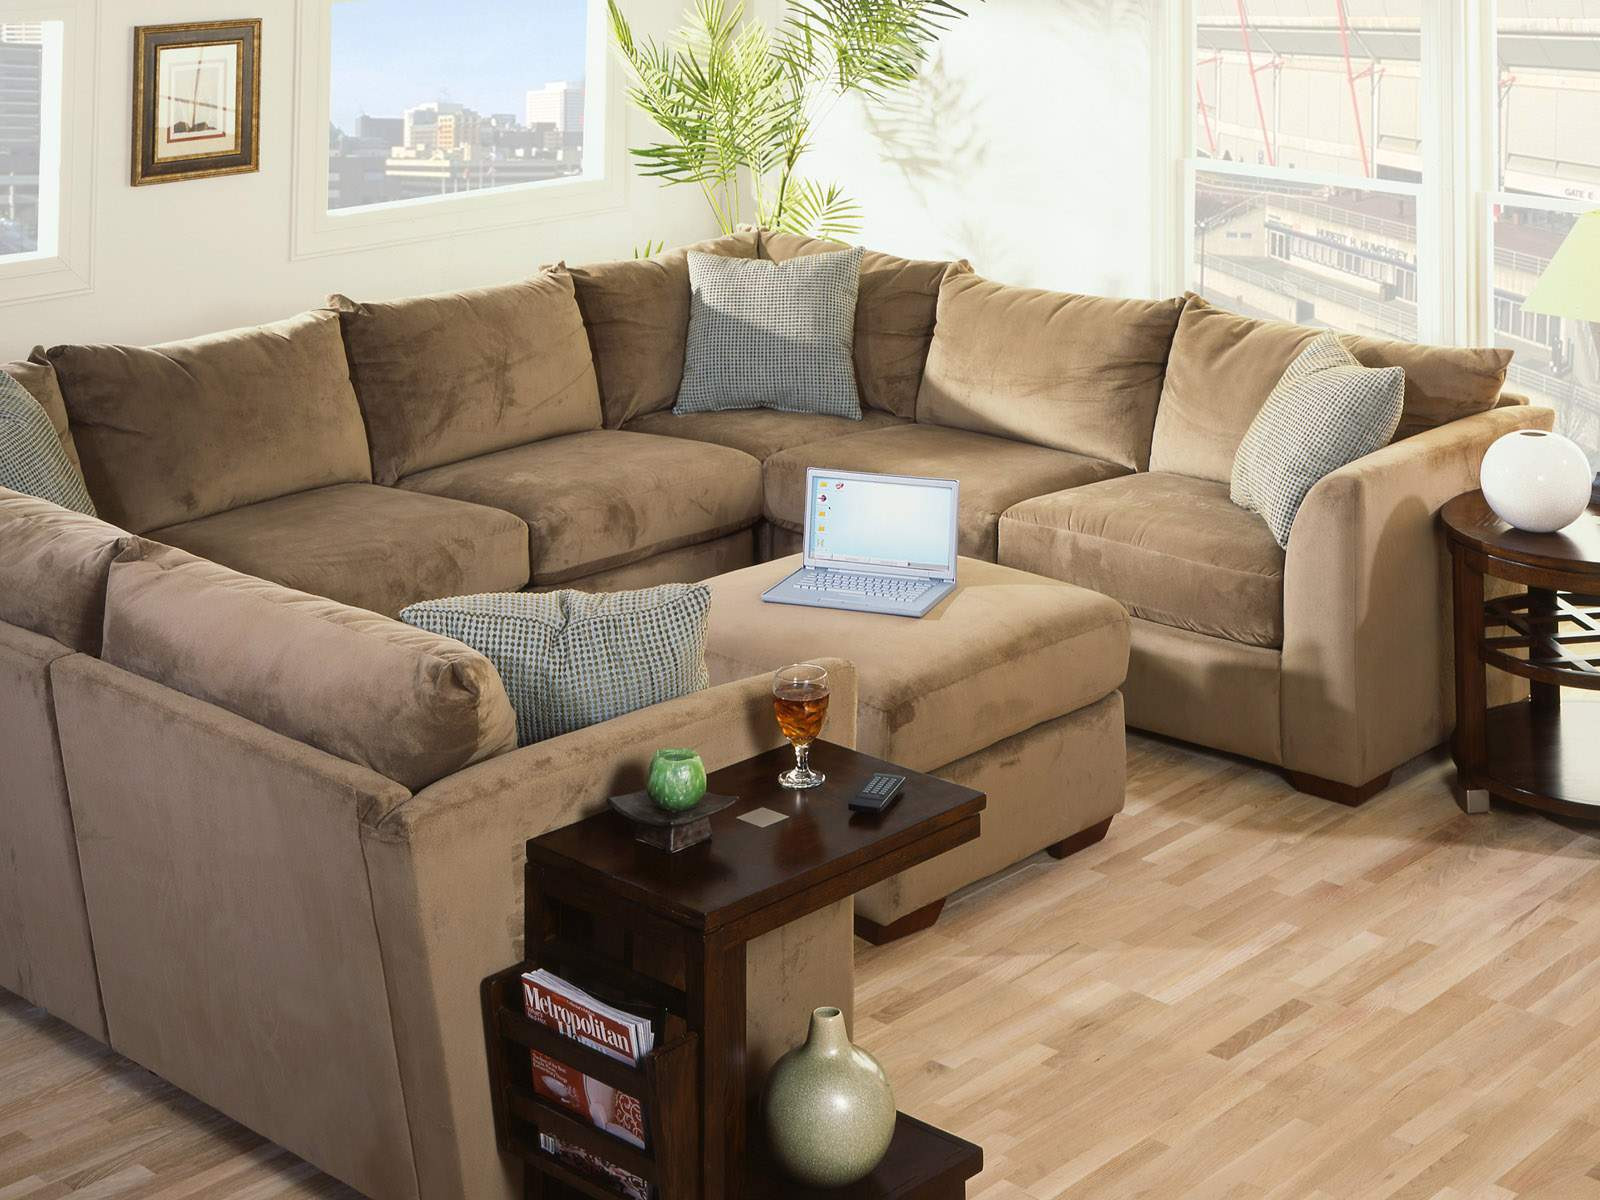 Best ideas about Living Room Couch
. Save or Pin 15 Really Beautiful Sofa Designs And Ideas Now.